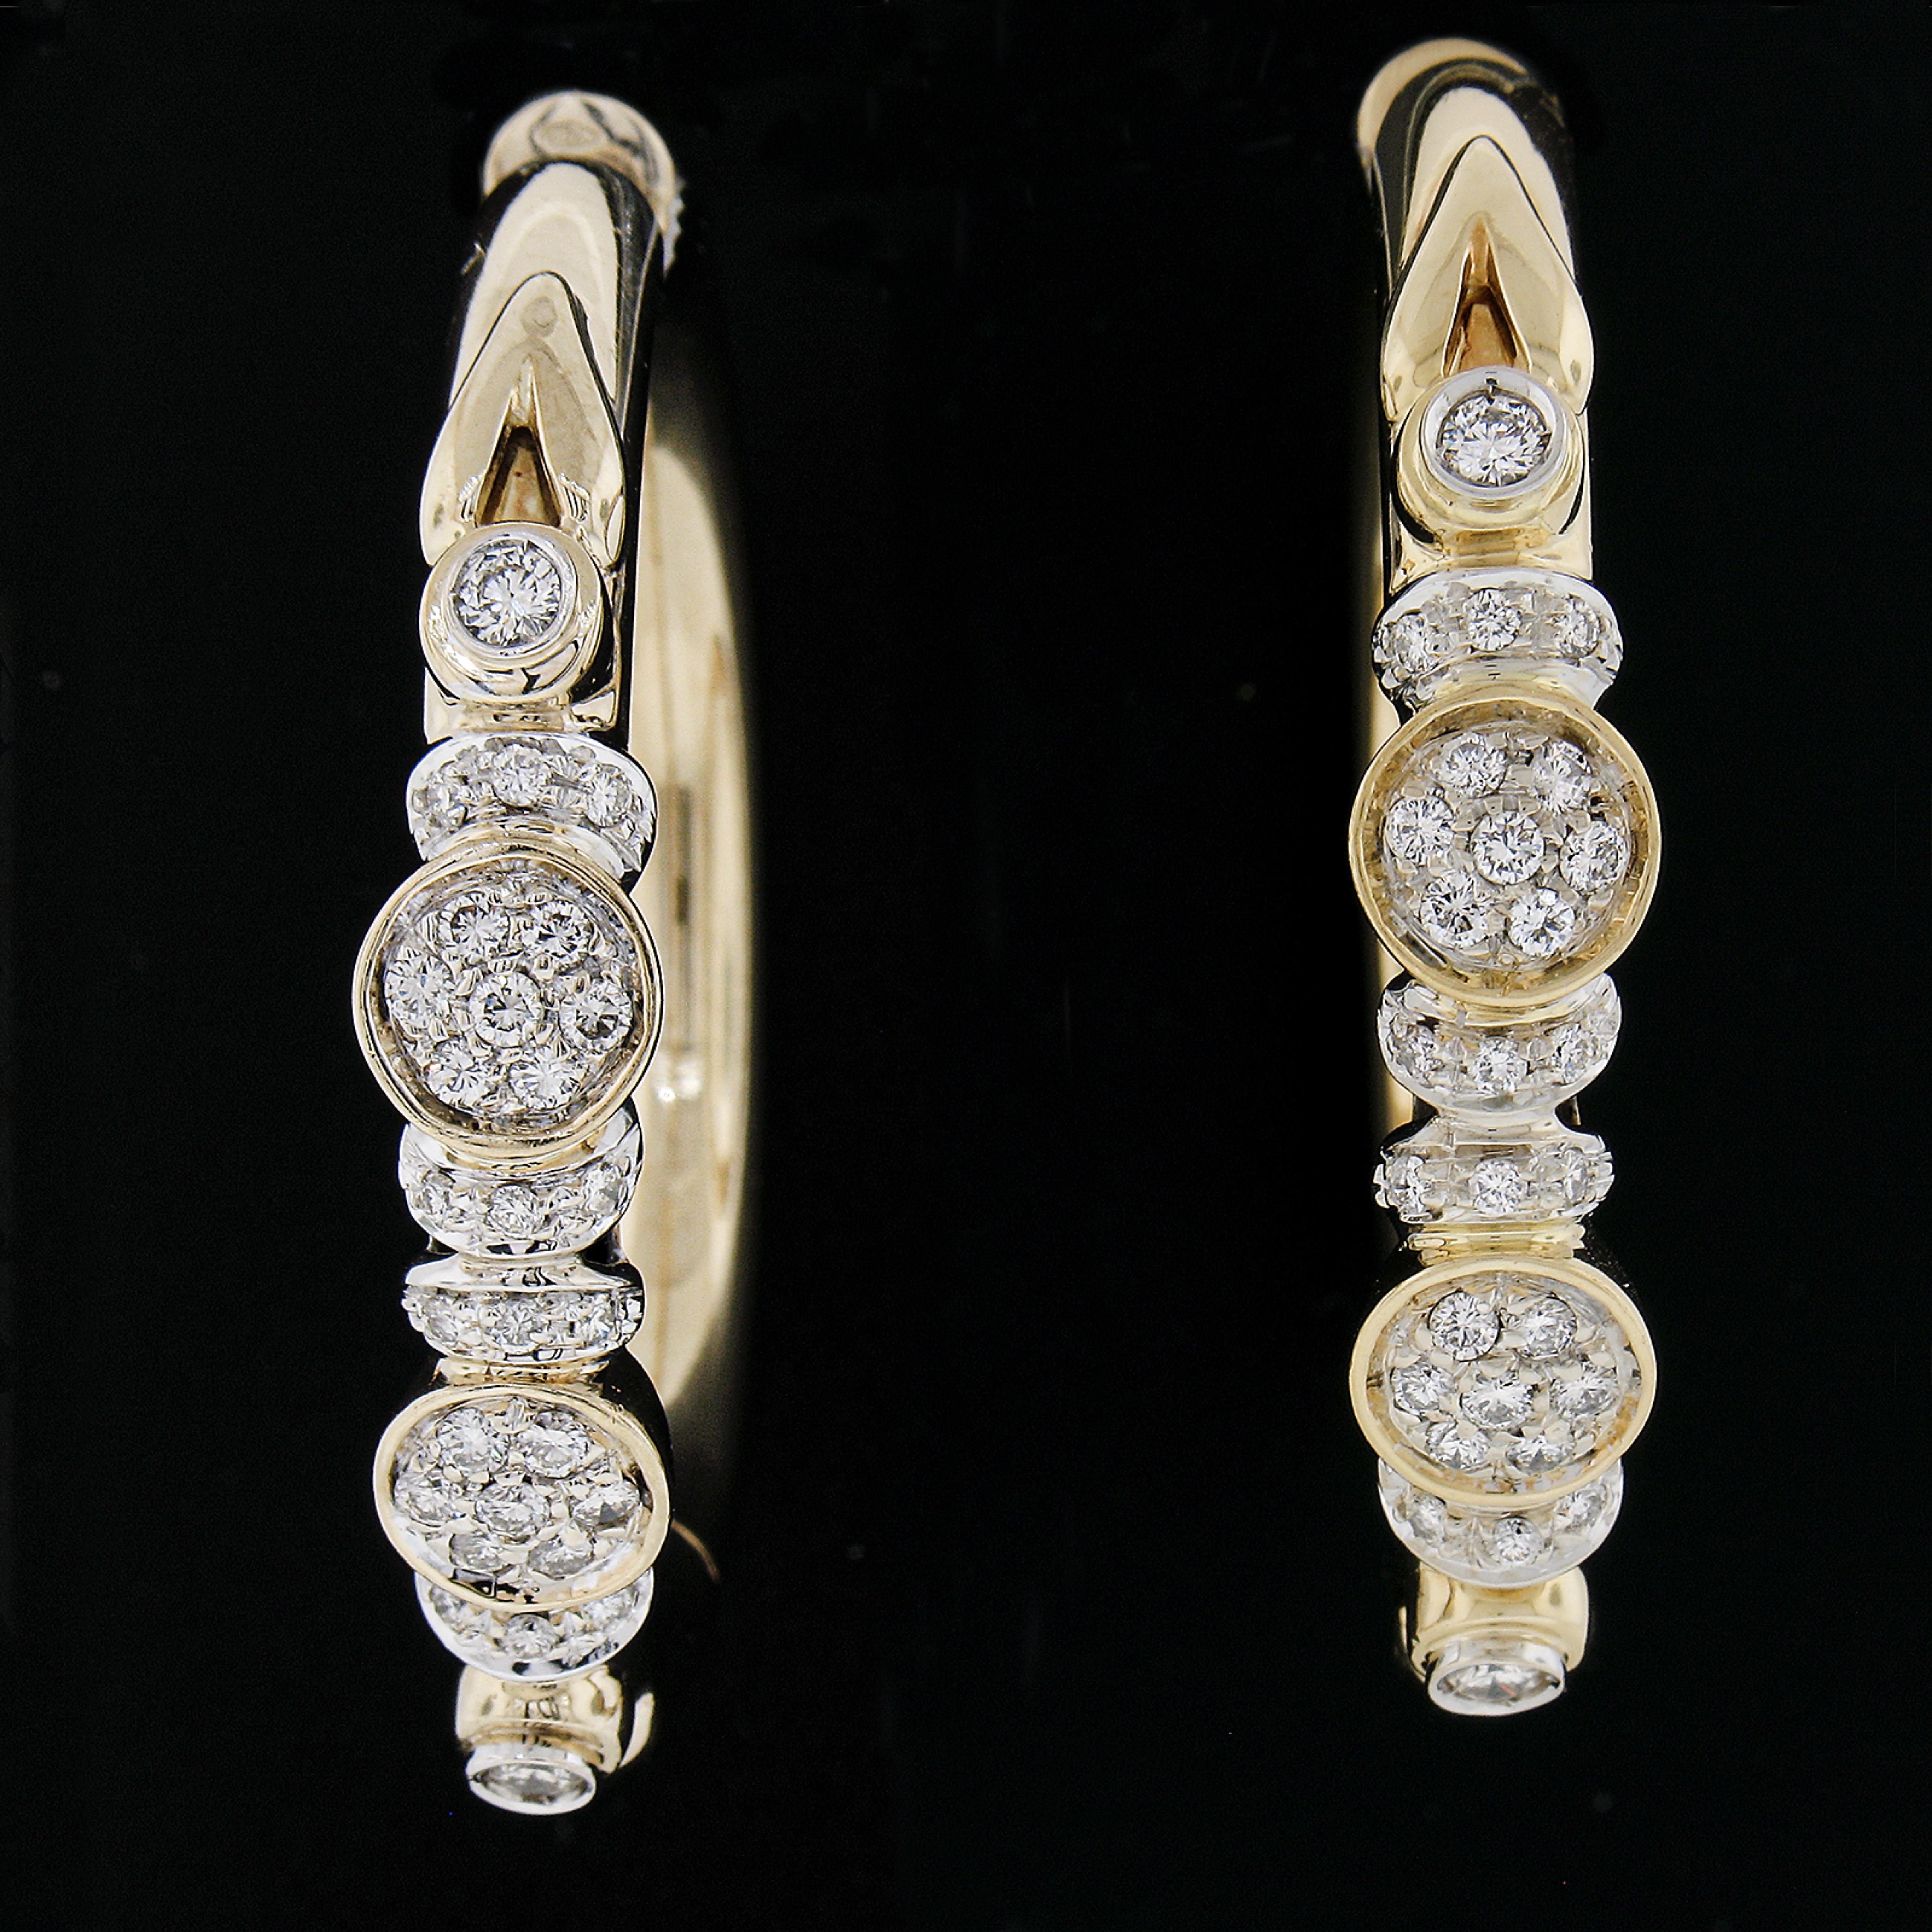 --Stone(s):--
(56) Natural Genuine Diamonds - Round Brilliant Cut - Pave & Bezel Set - J-L Color - VS1-I1 Clarity
Total Carat Weight:	1.15 (approx.)

Material: Solid 18k Yellow Gold 
Weight: 37.14 Grams
Closure:	Posts w/ Hinged Closure (pierced ears